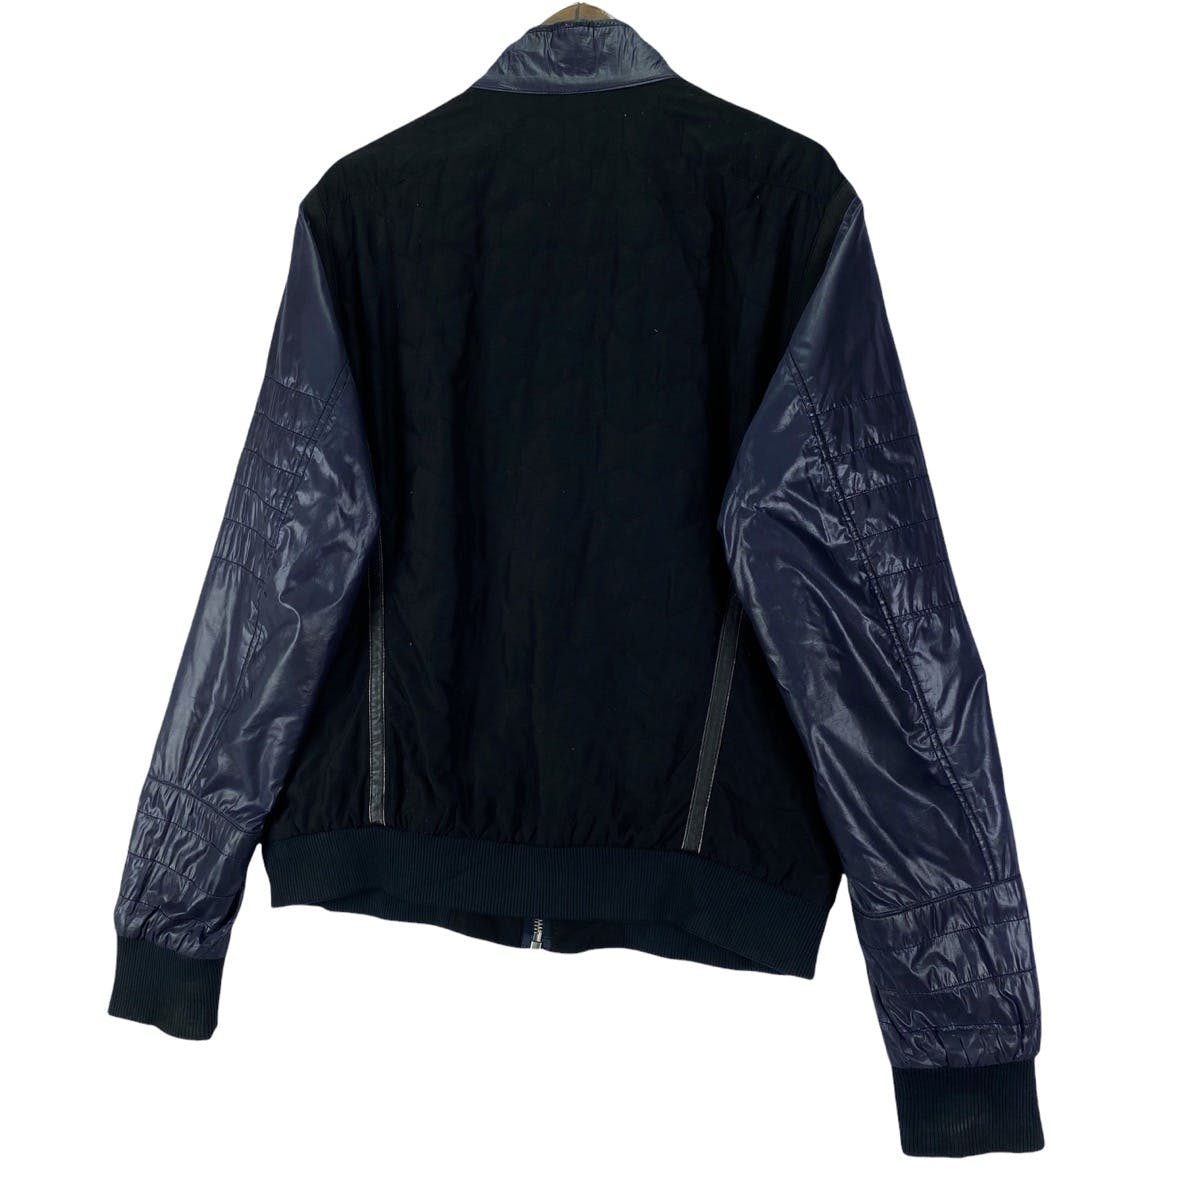 Diesel Honeycomb Quilted Bomber Jacket - 7